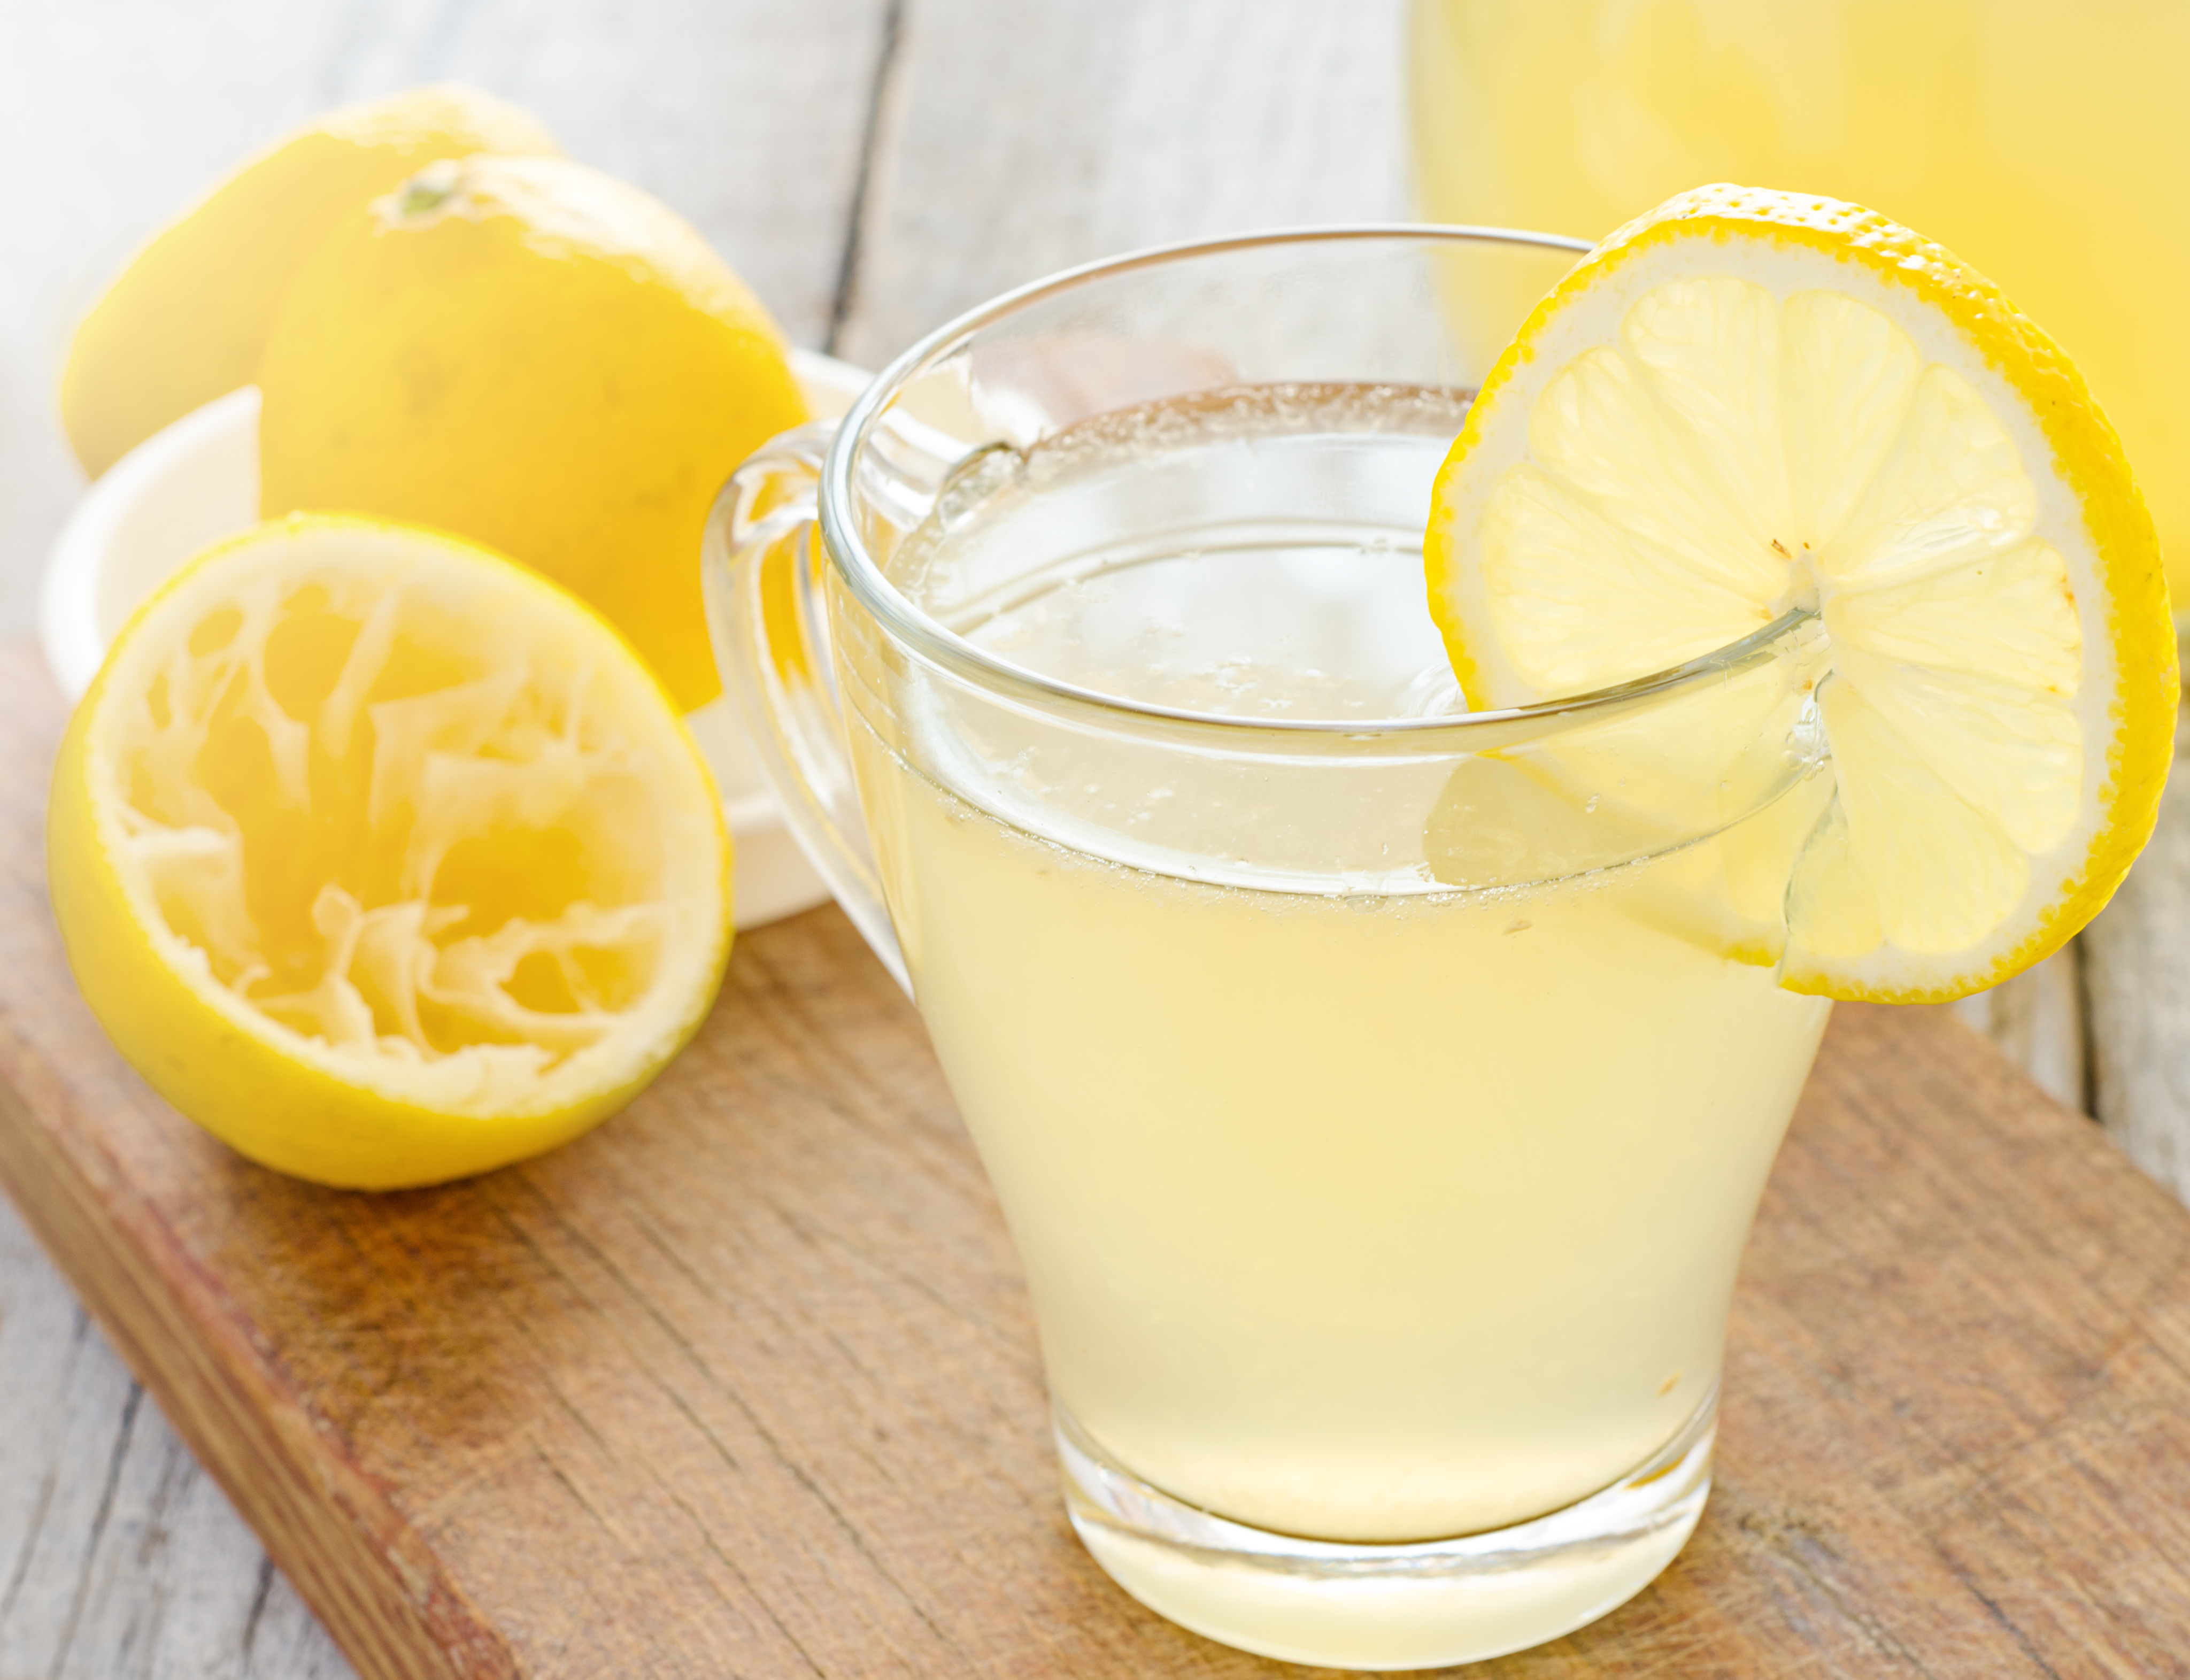 Try gargling with lemonade to qu...